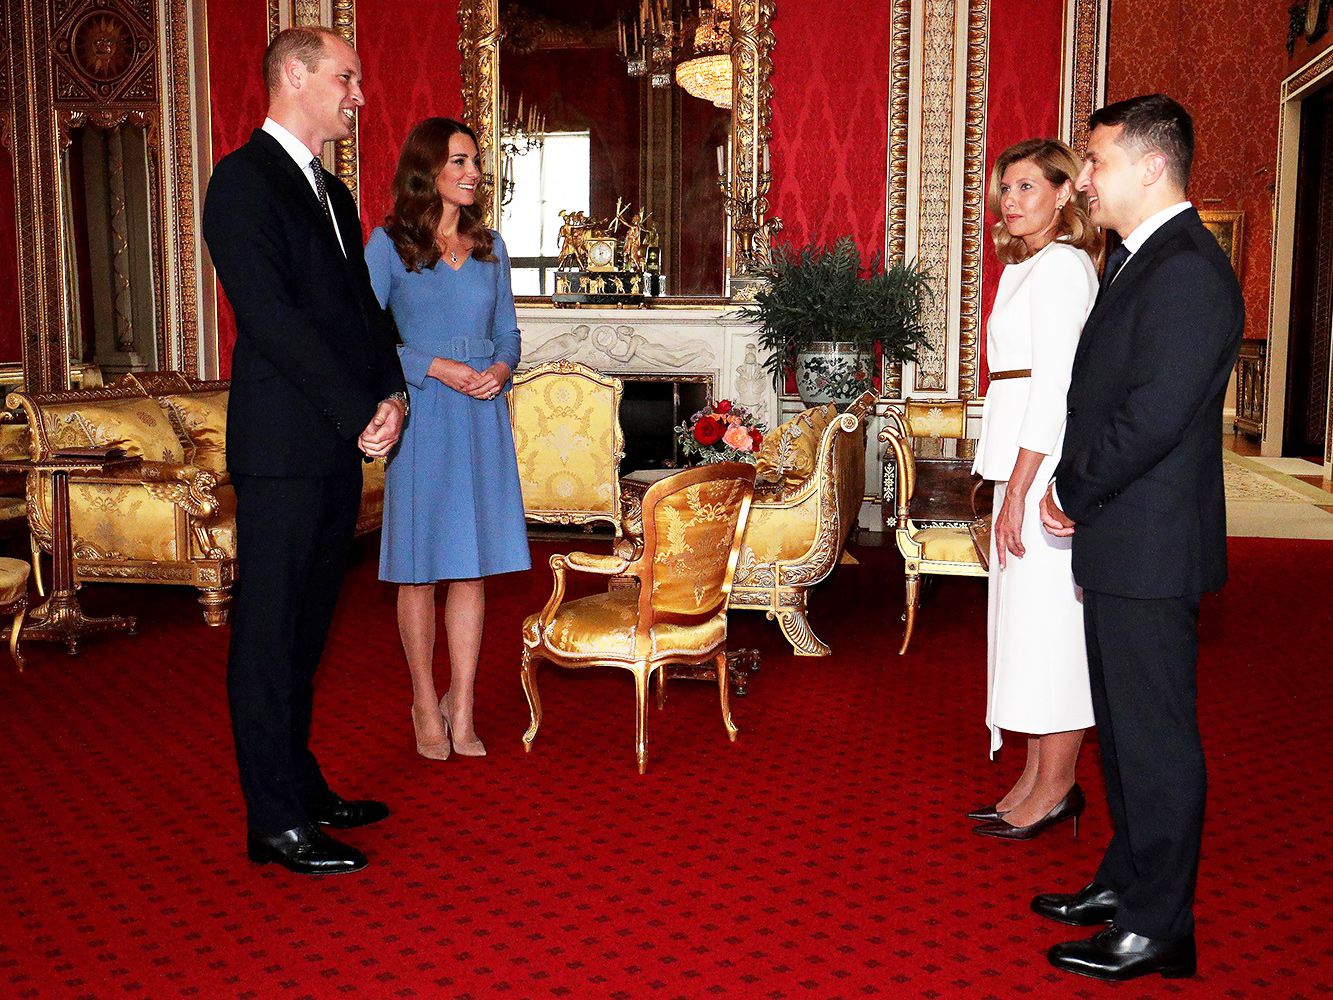 Royal family meeting with the president of Ukraine alongside his wife